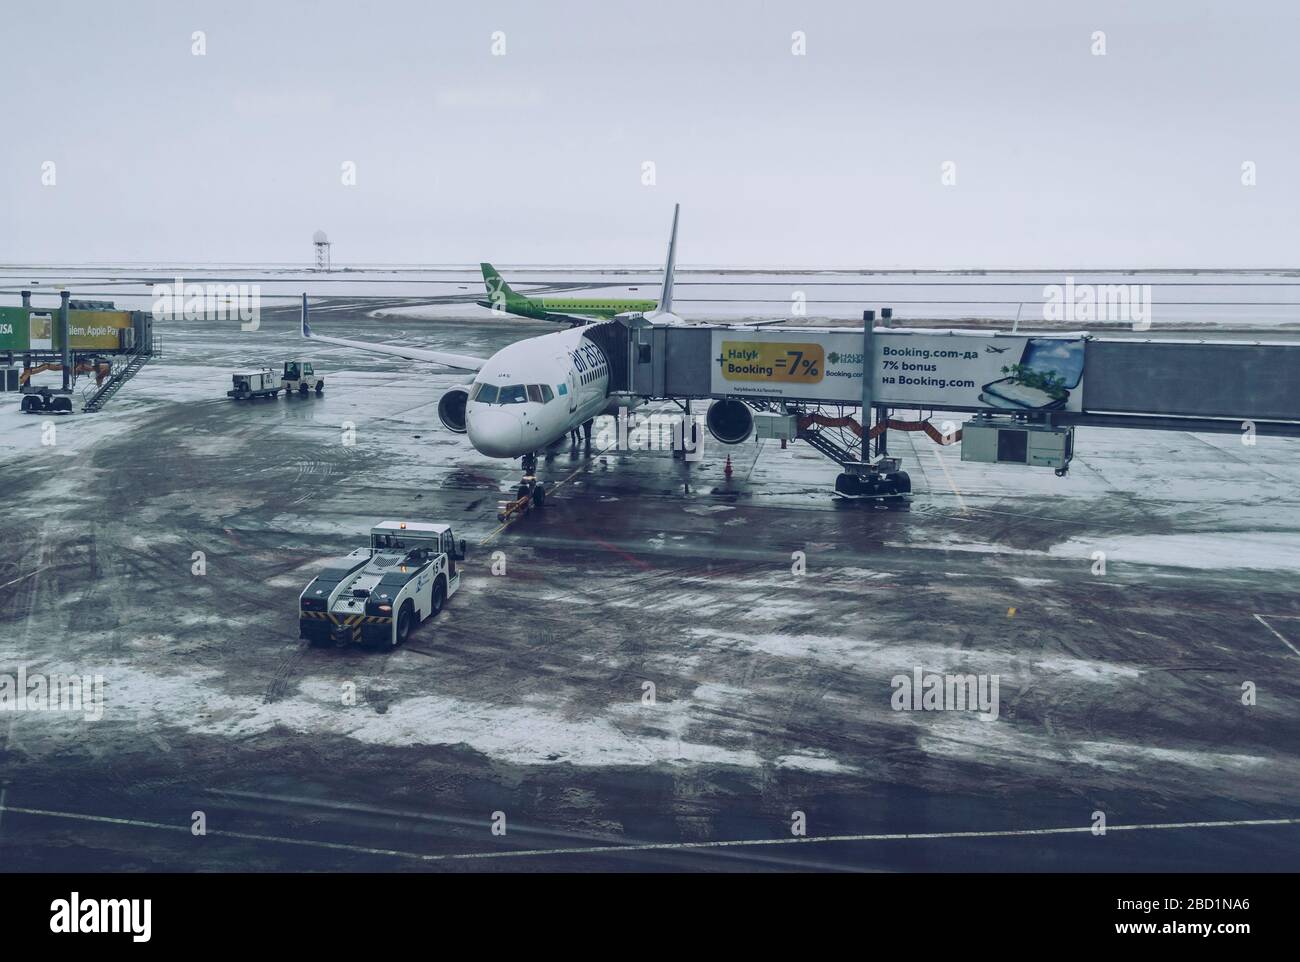 Nur-Sultan, Kazakhstan, 04 January, 2020: airplane is being managed by airport workers on cold winter day Stock Photo